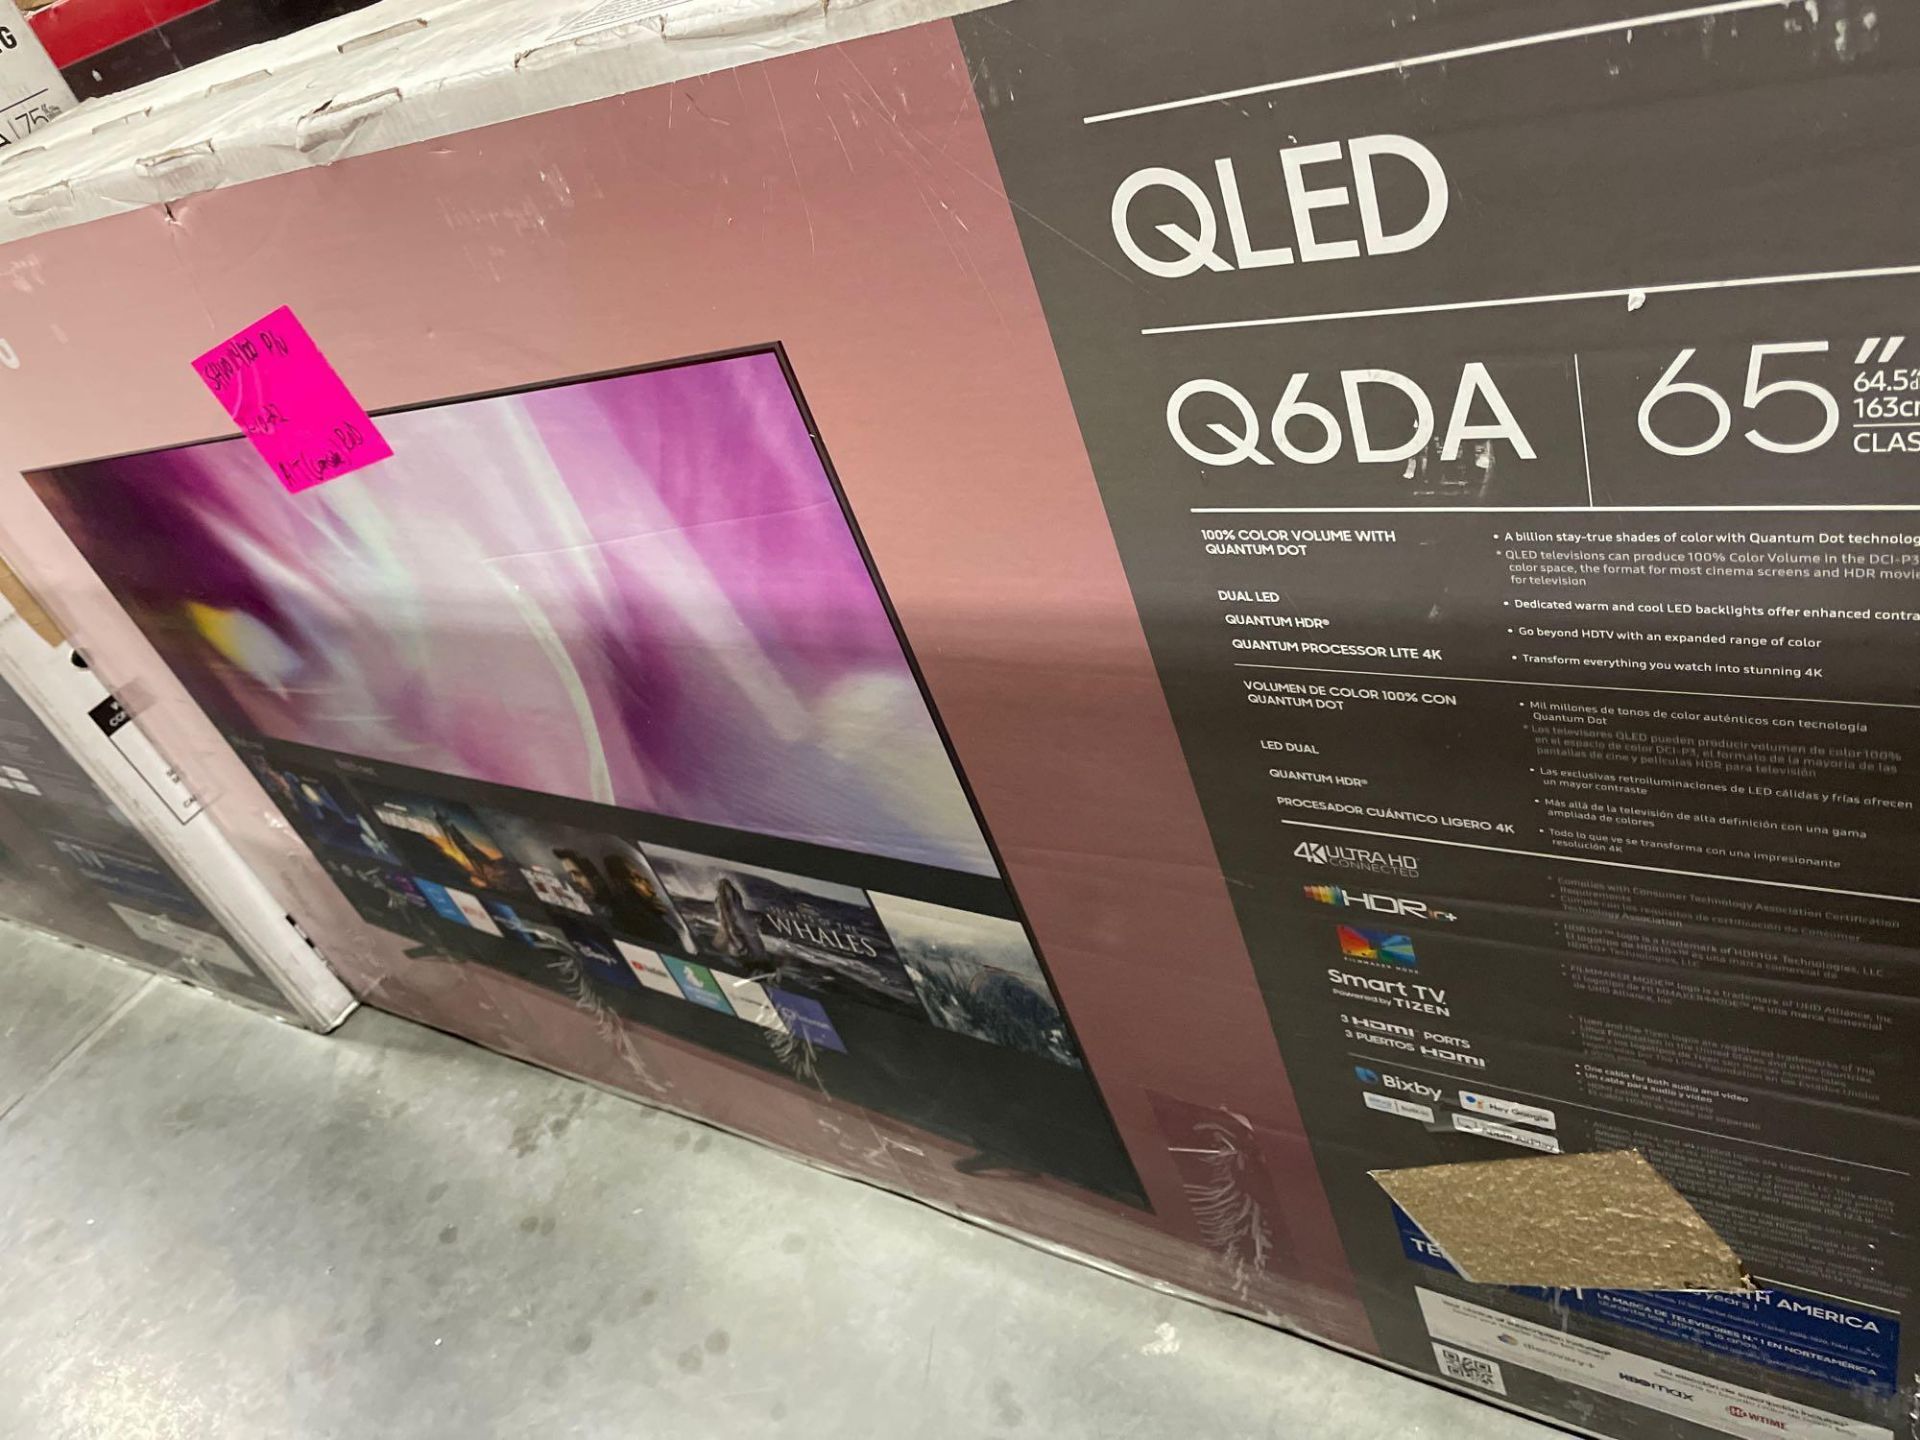 Two Samsung QLED - Image 2 of 3